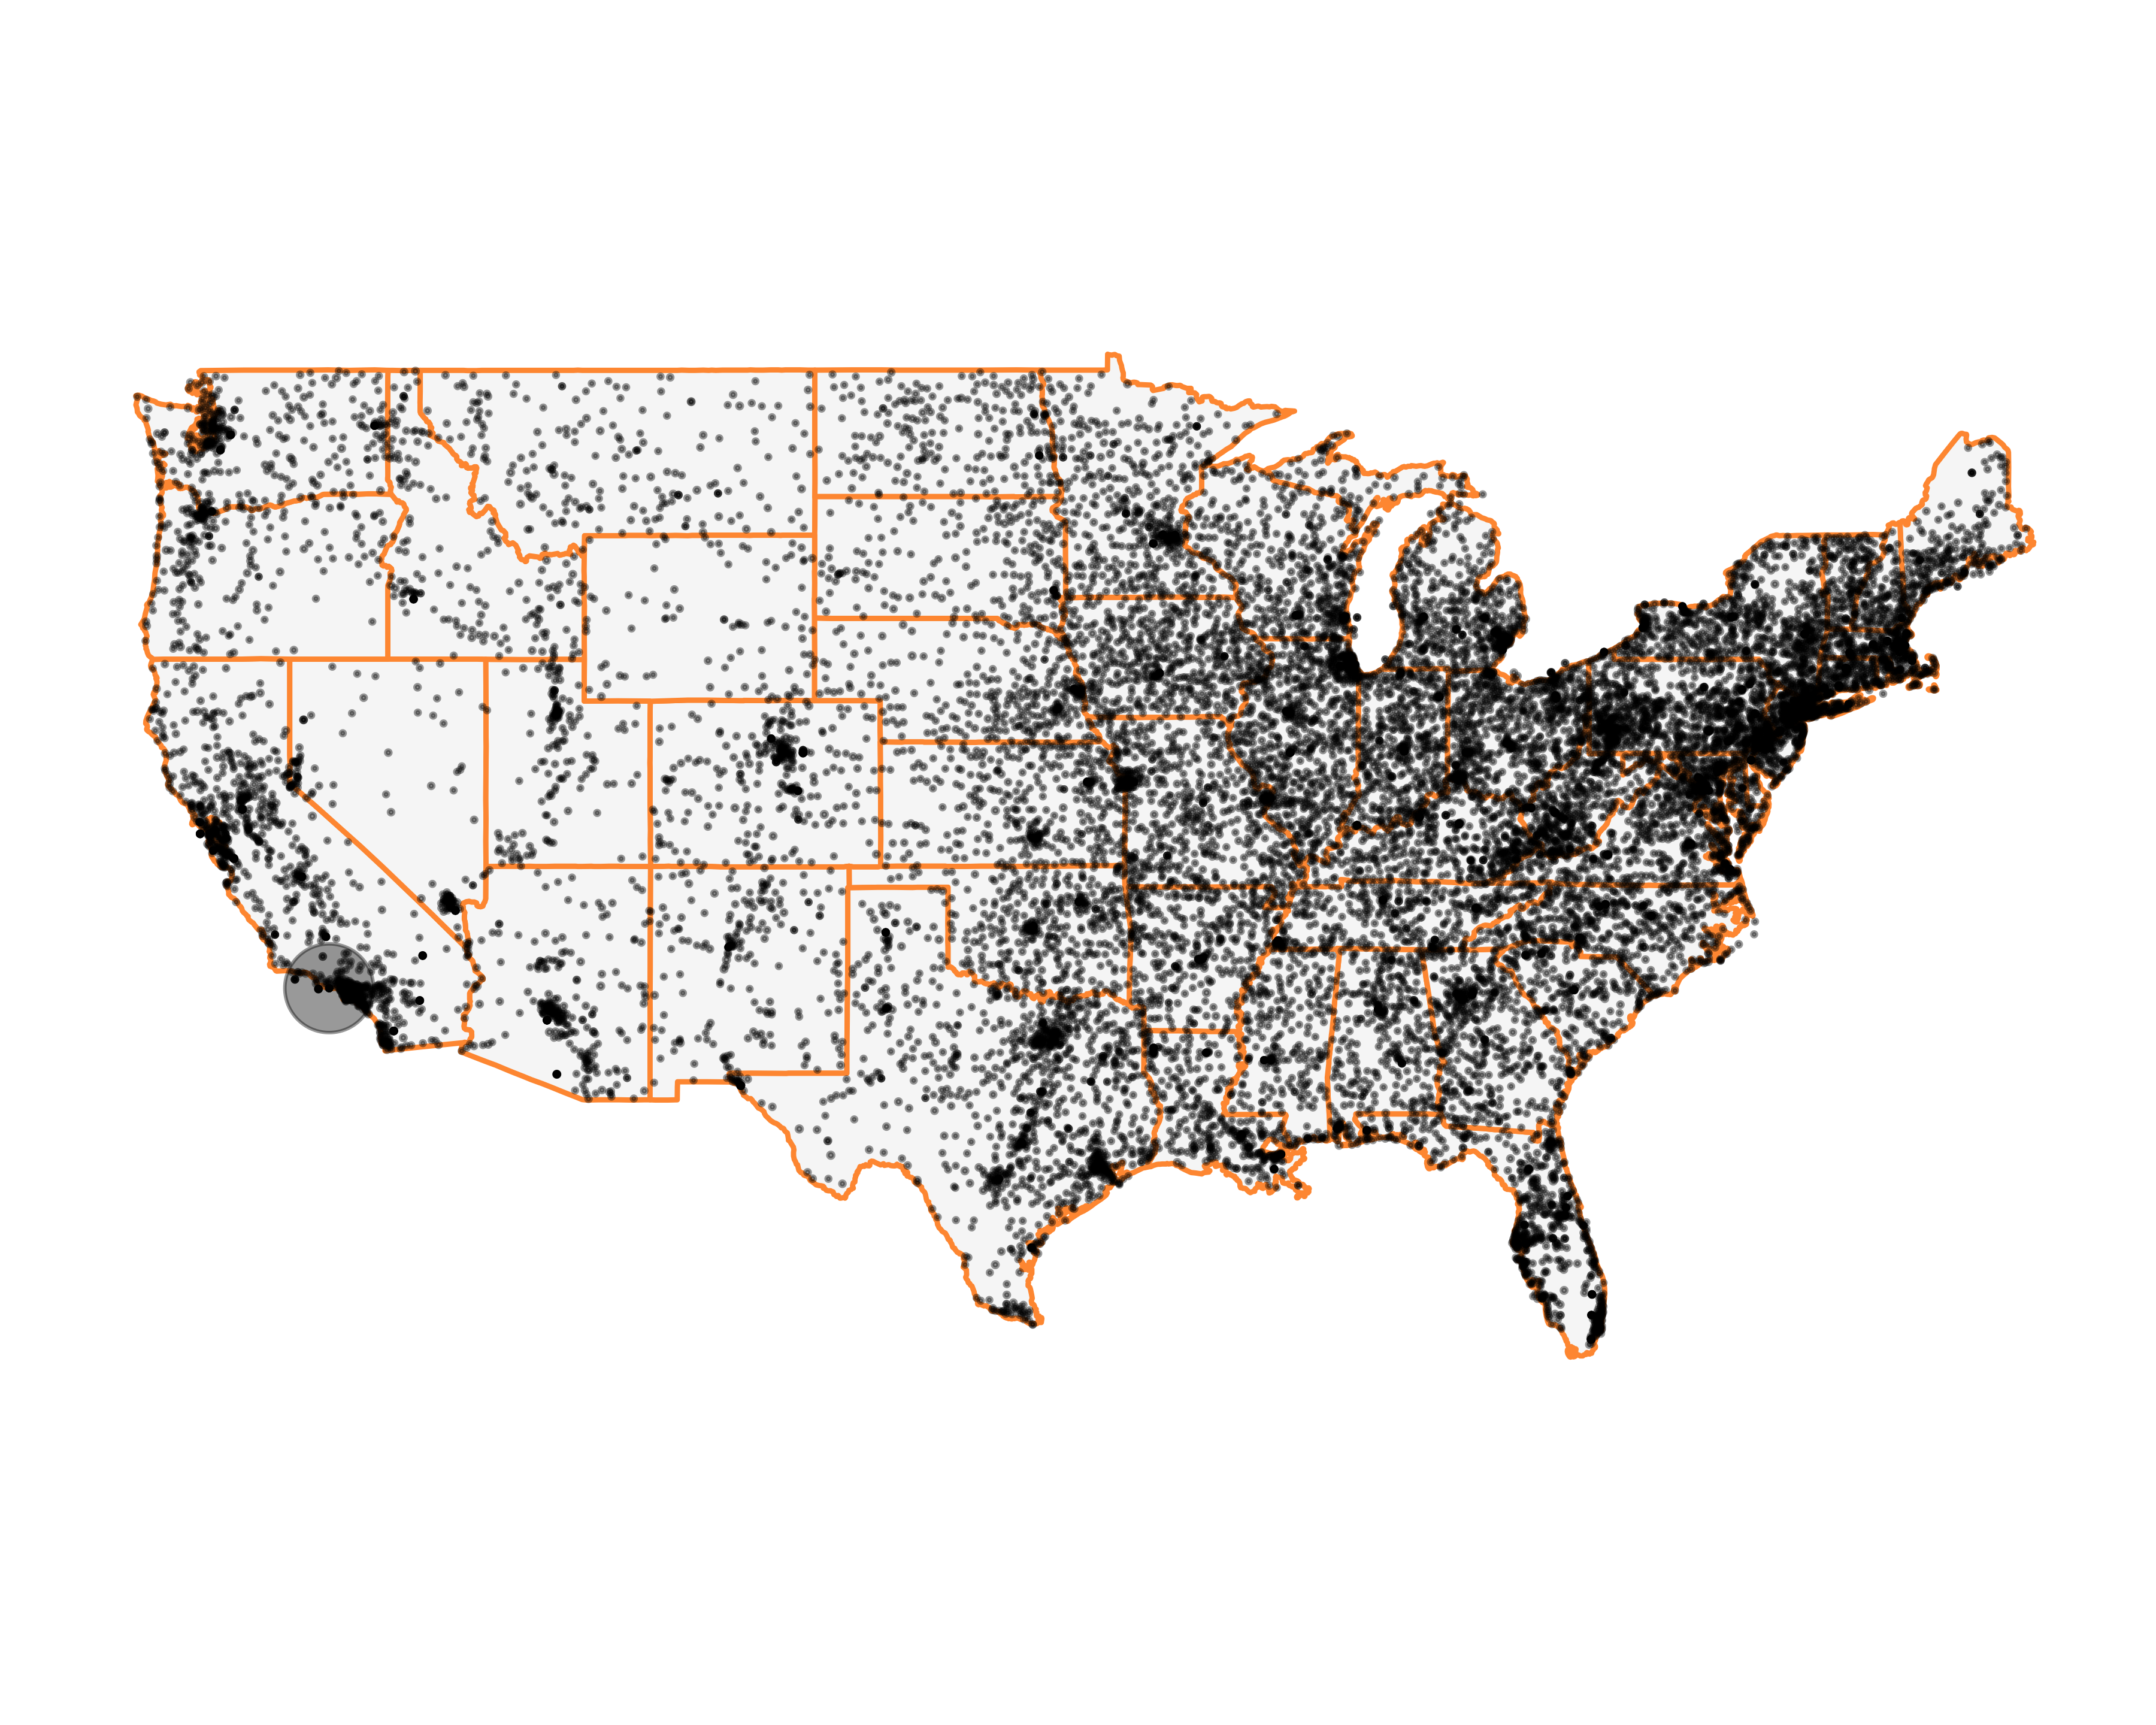 Number of prospects by ZIP code on the US map